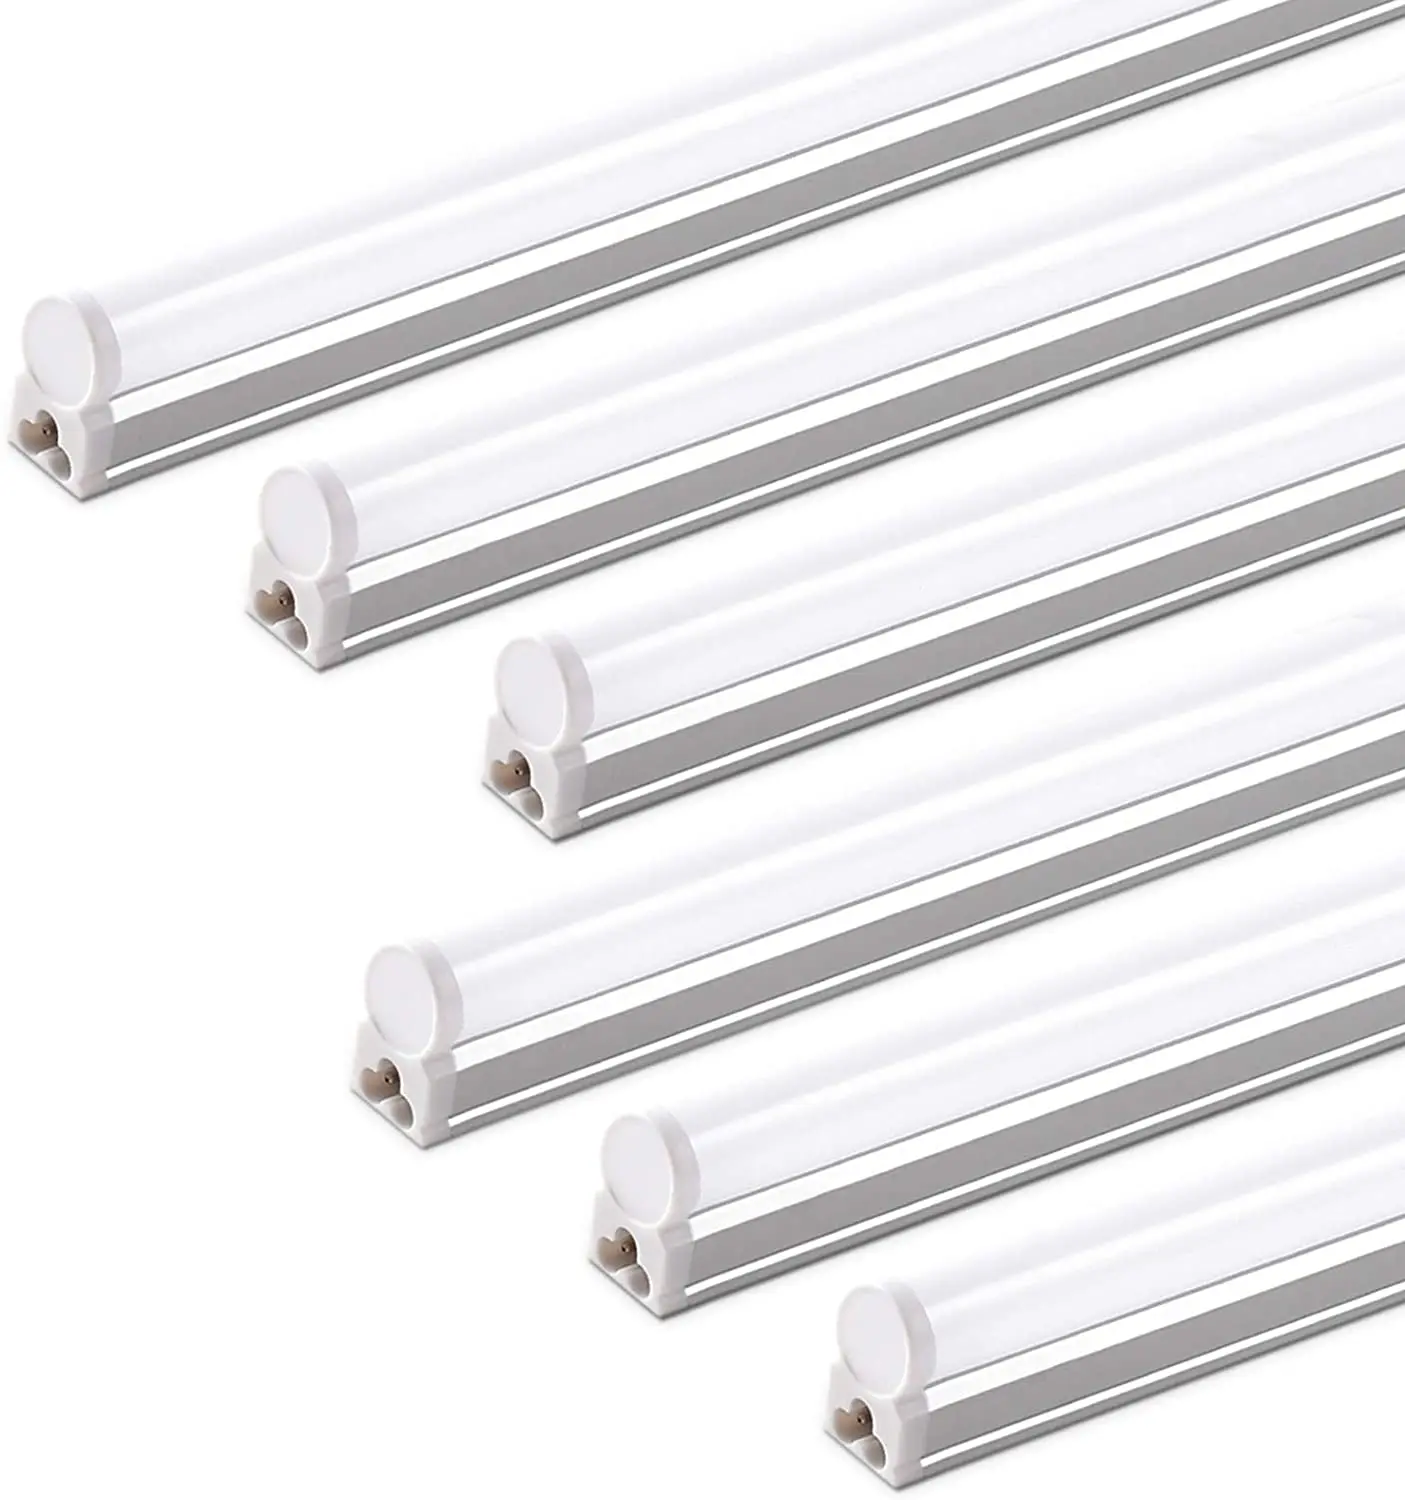 T5 2ft 4ft 5ft 10W 18W 20W integrated single led shop lights fluorescent led light ceiling fixtures replace fluorescent tube